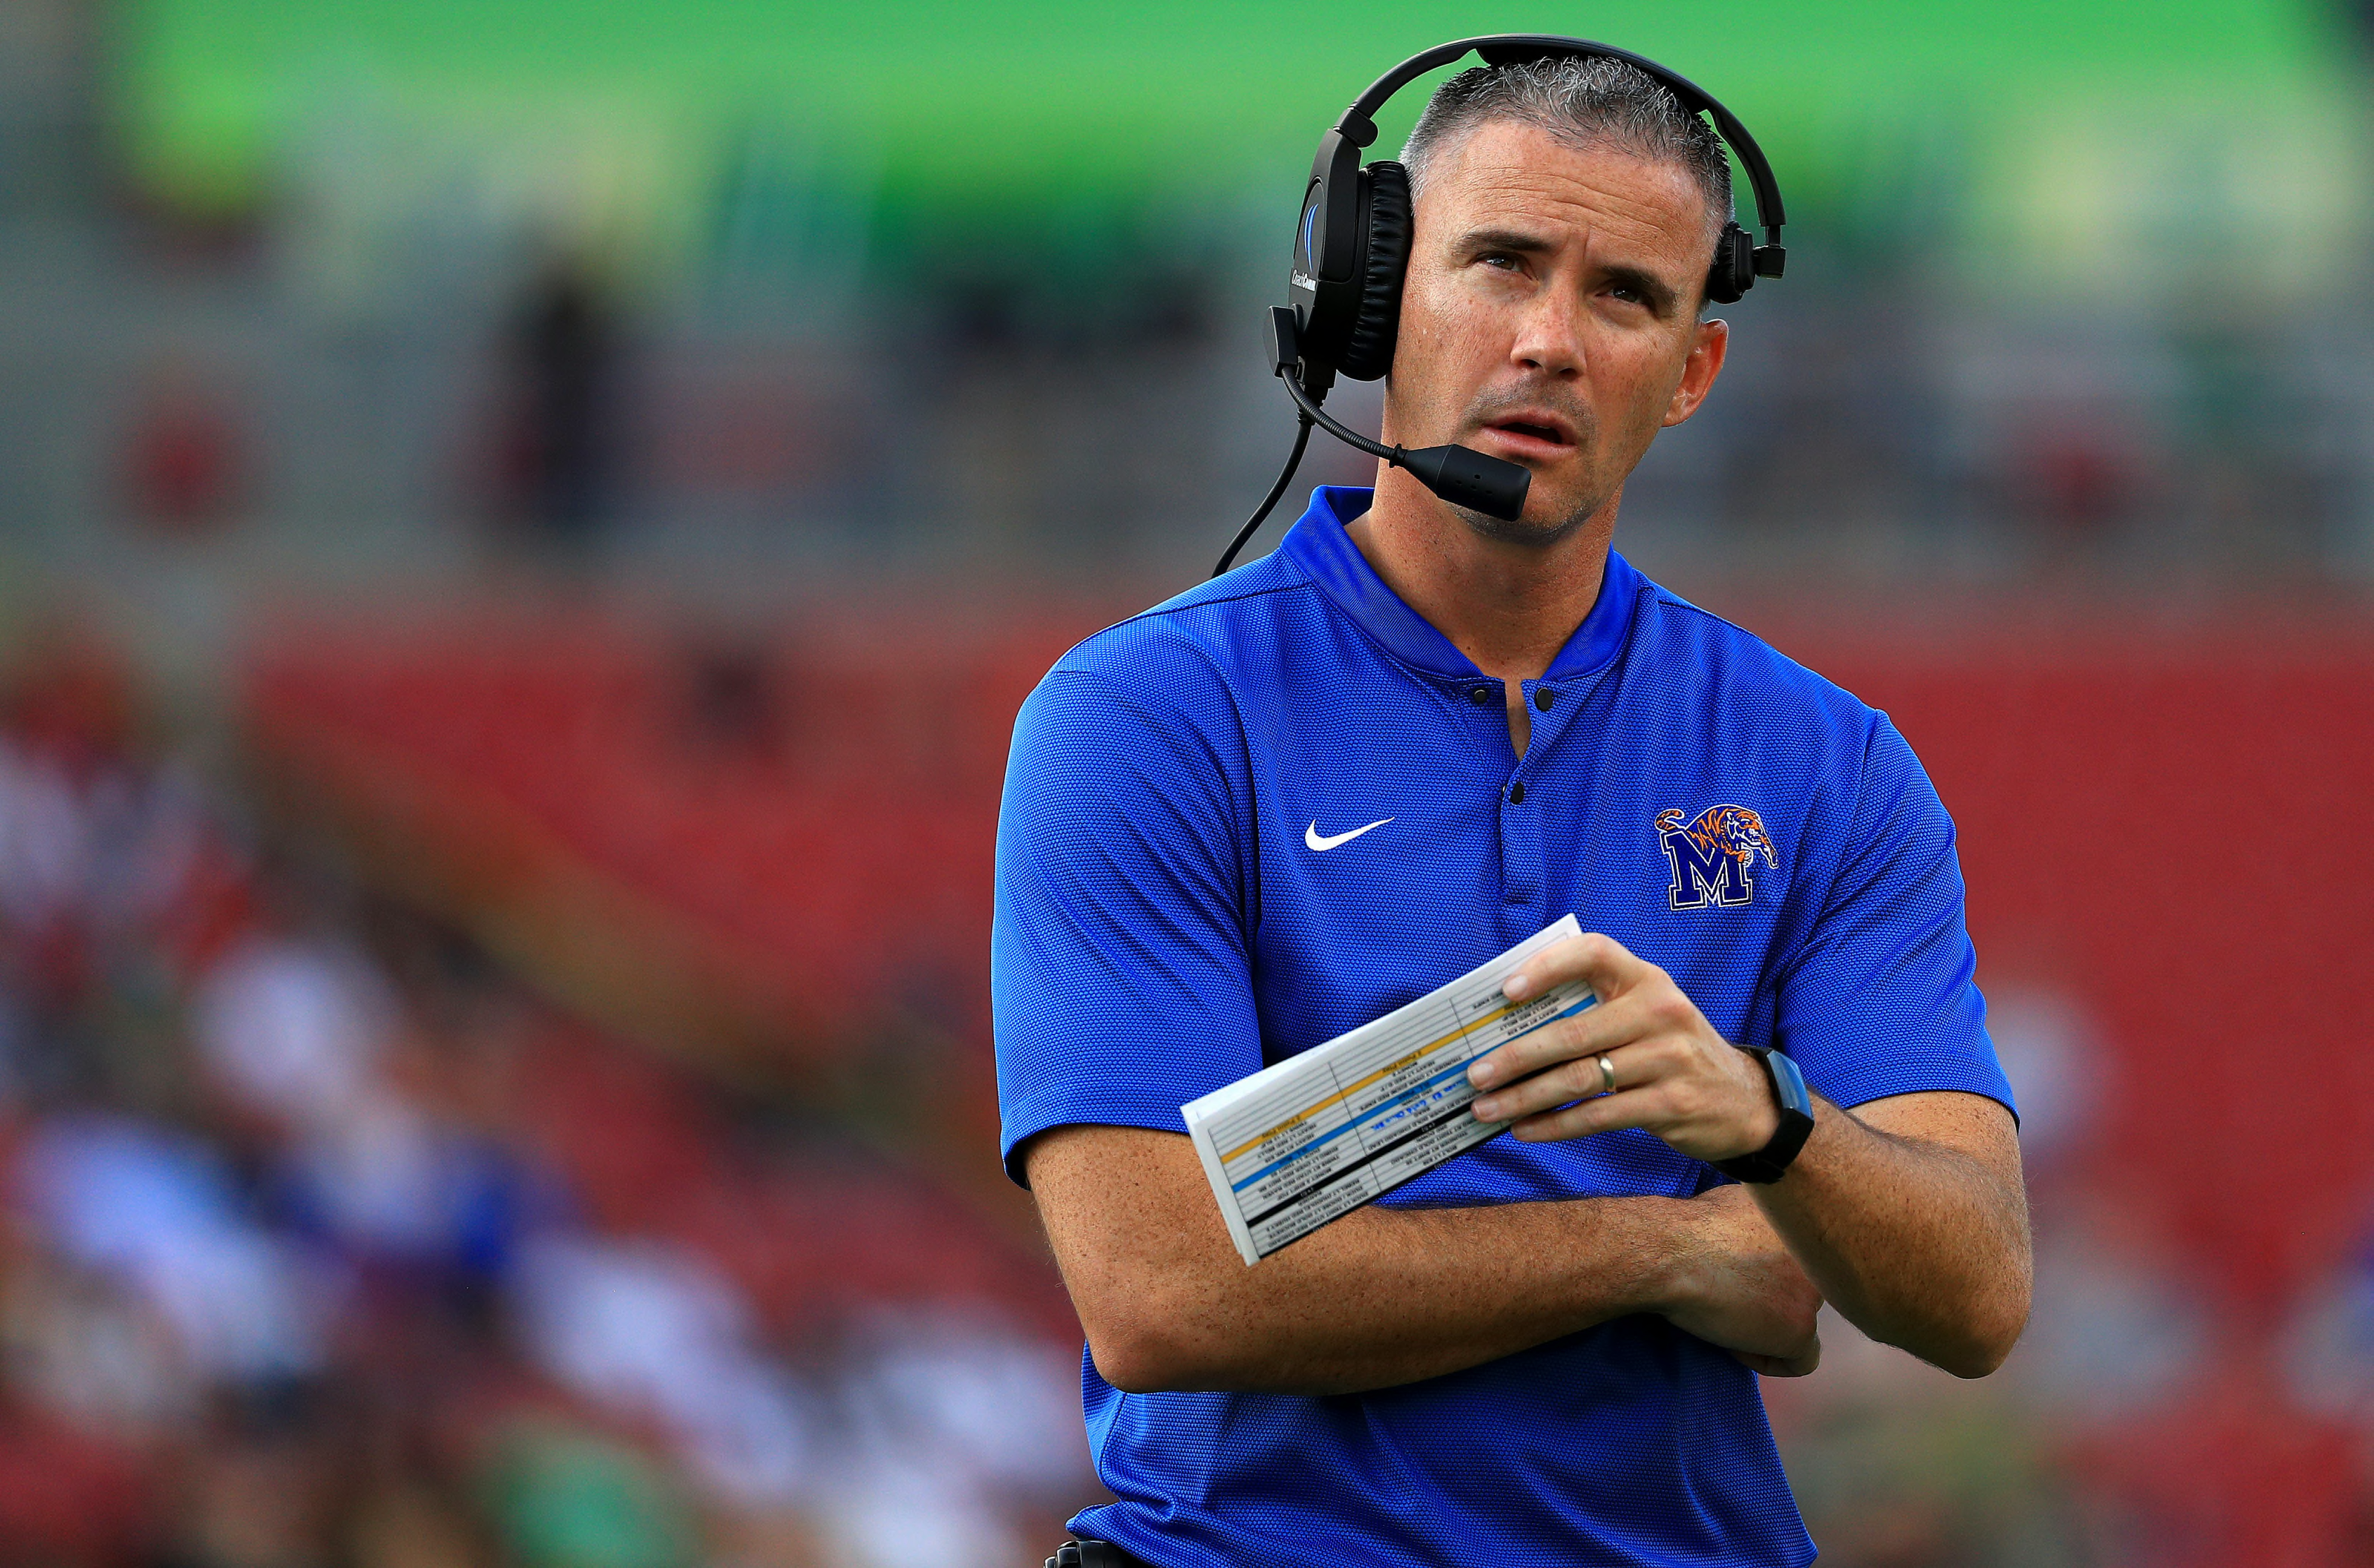 FSU football: Why Mike Norvell is way ahead of the curve